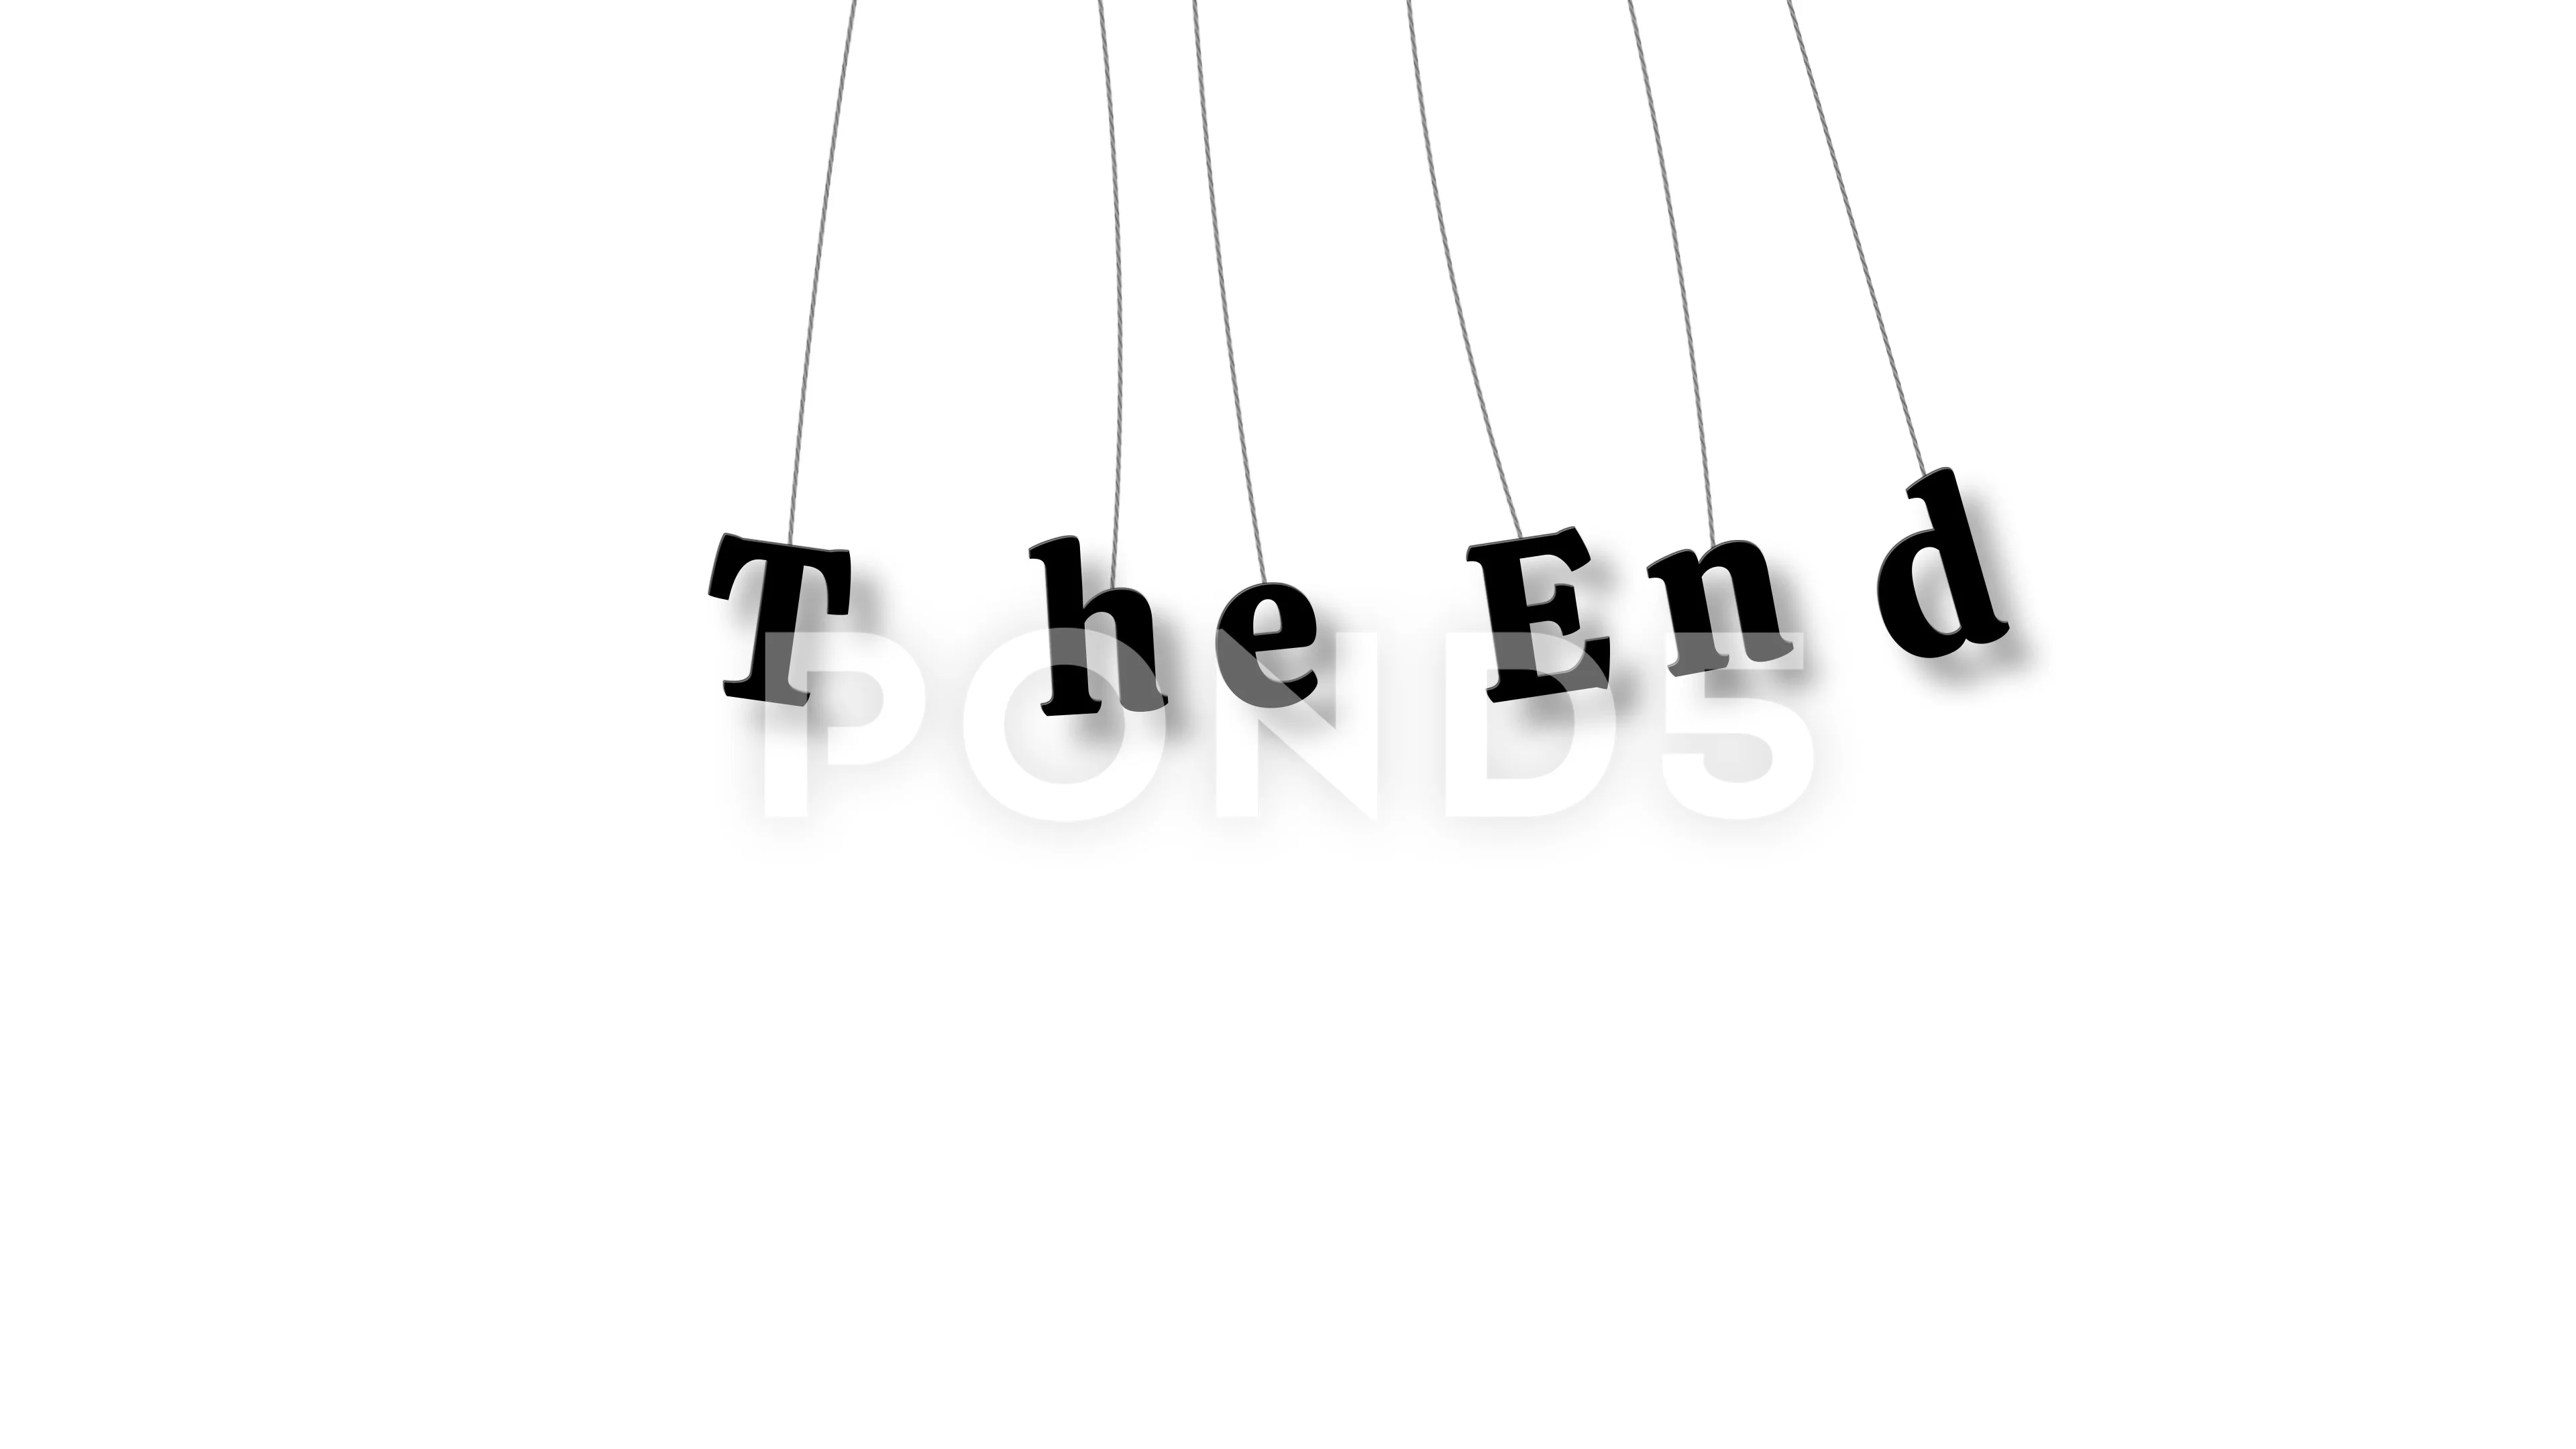 the end moving pictures